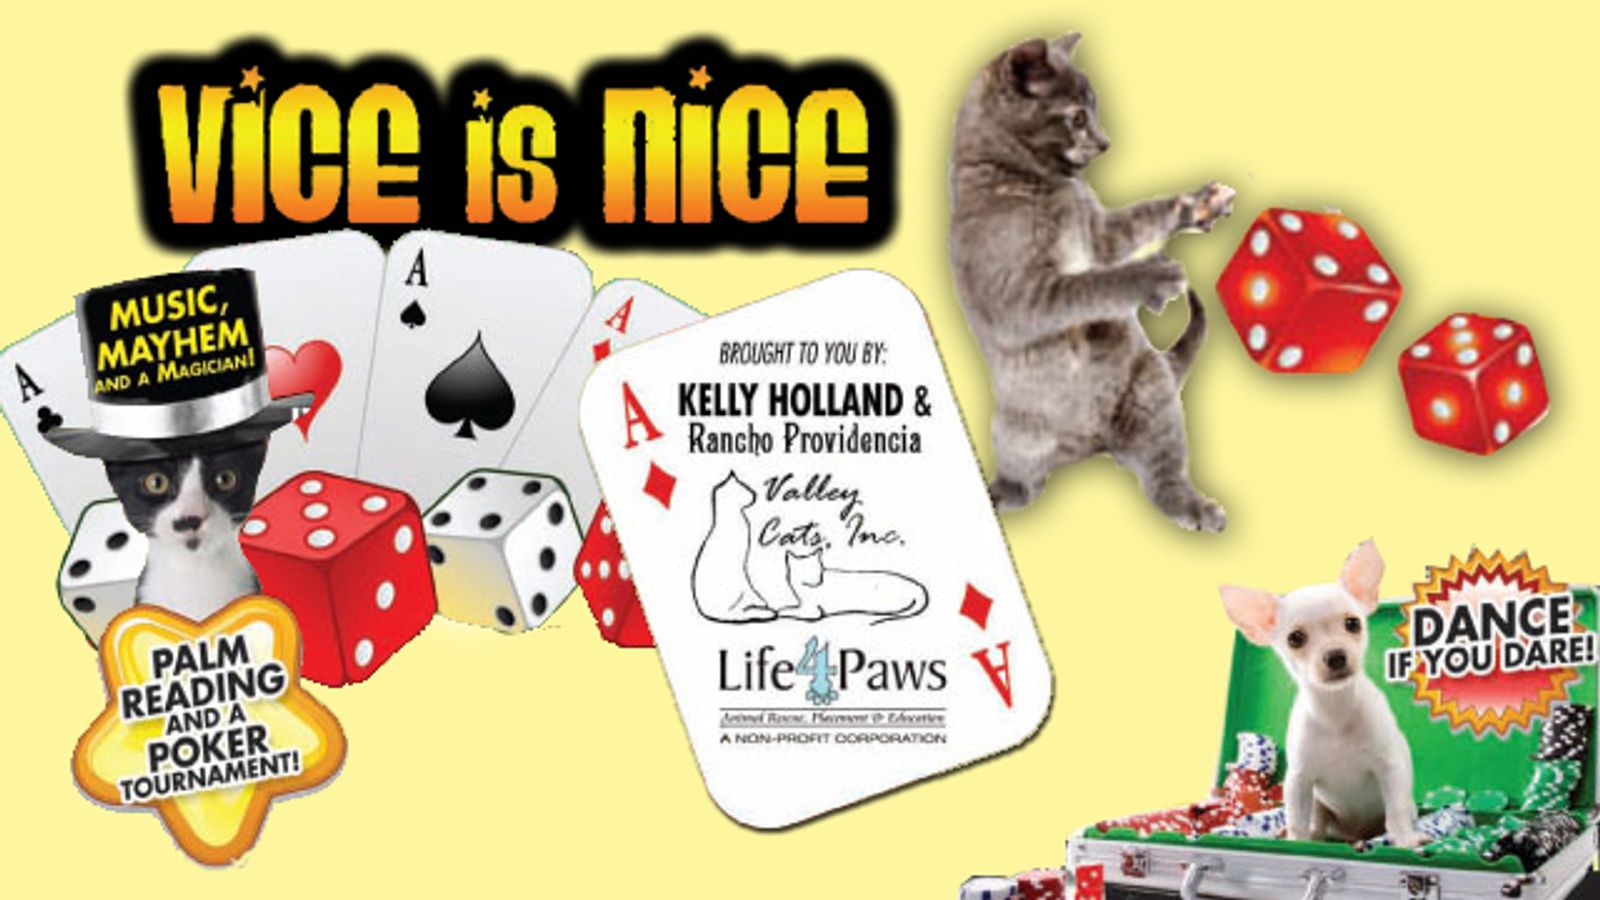 ‘Vice is Nice’ Animal Shelter Charity Event Set for July 24